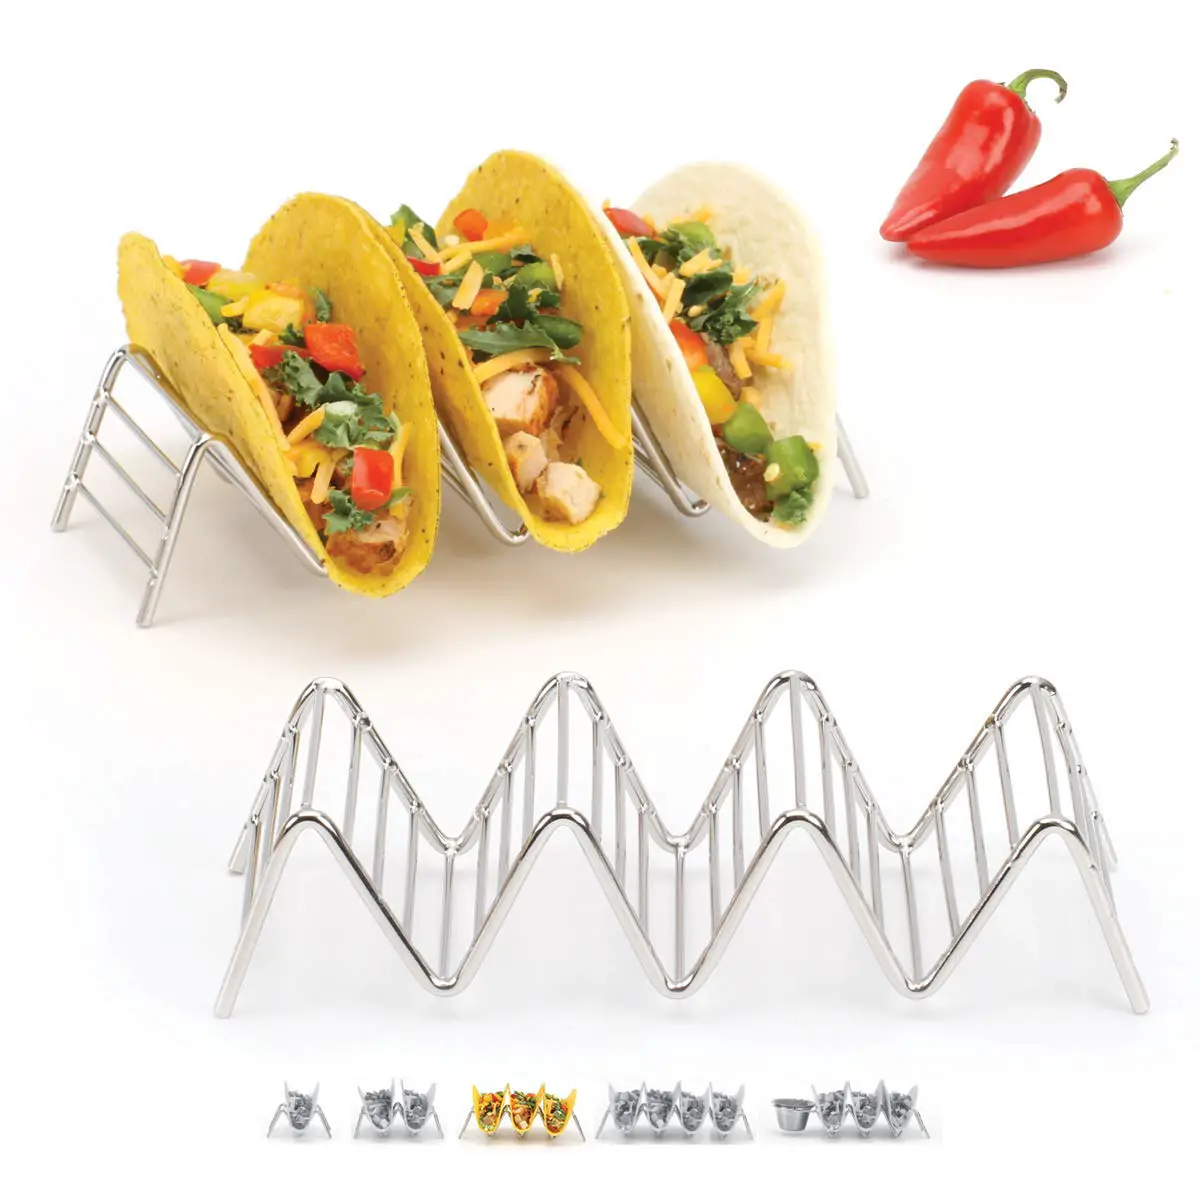 Top 10 Recommended Taco Shells In Air Fryer